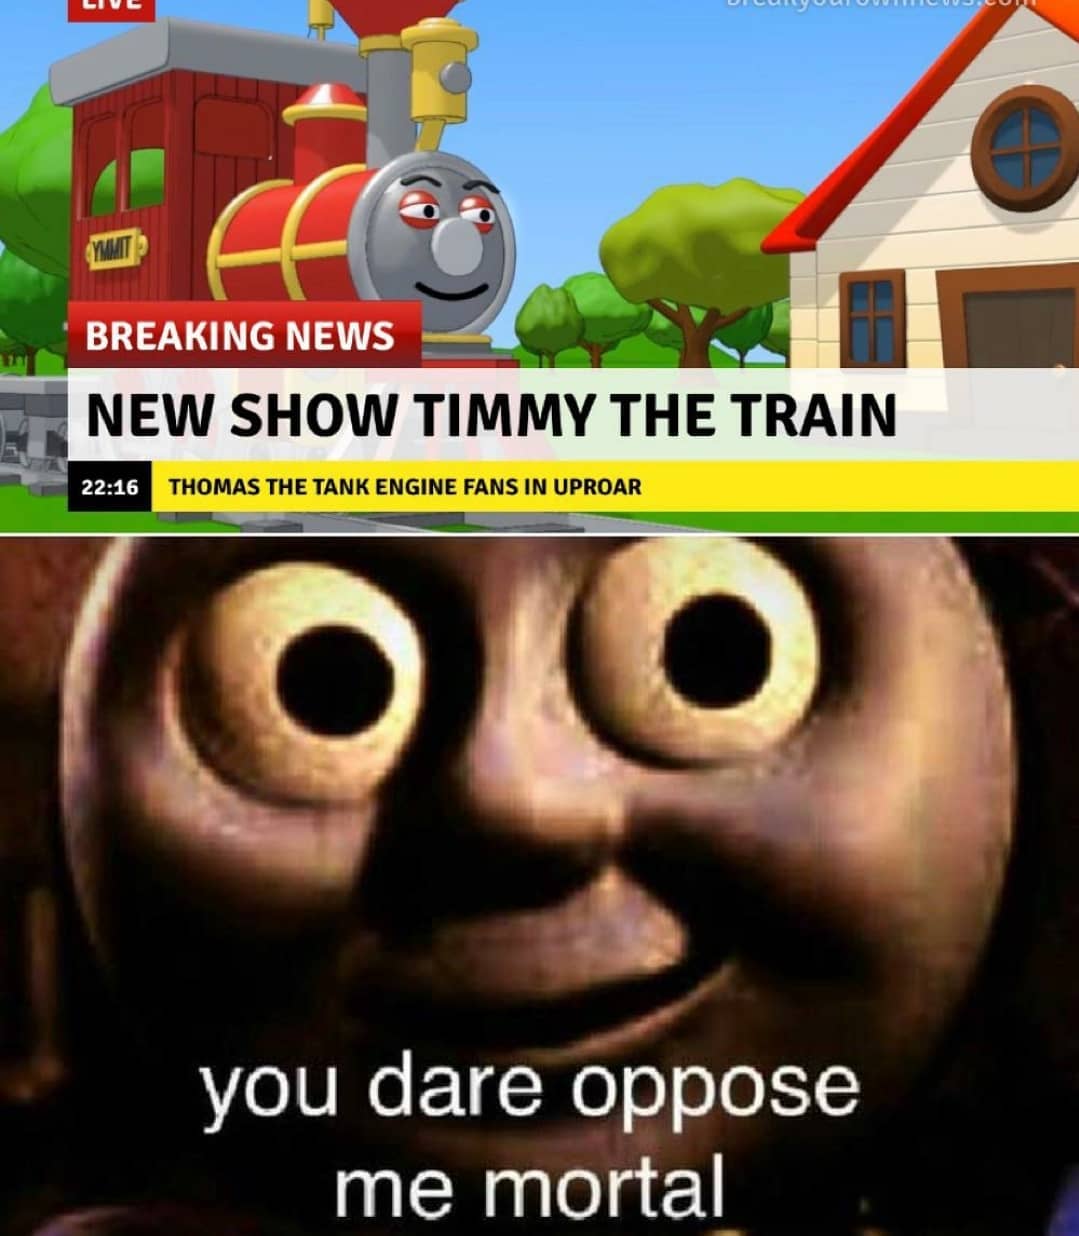 dank memes - dr phil memes - Live ffle Ymmot Breaking News New Show Timmy The Train Thomas The Tank Engine Fans In Uproar you dare oppose me mortal